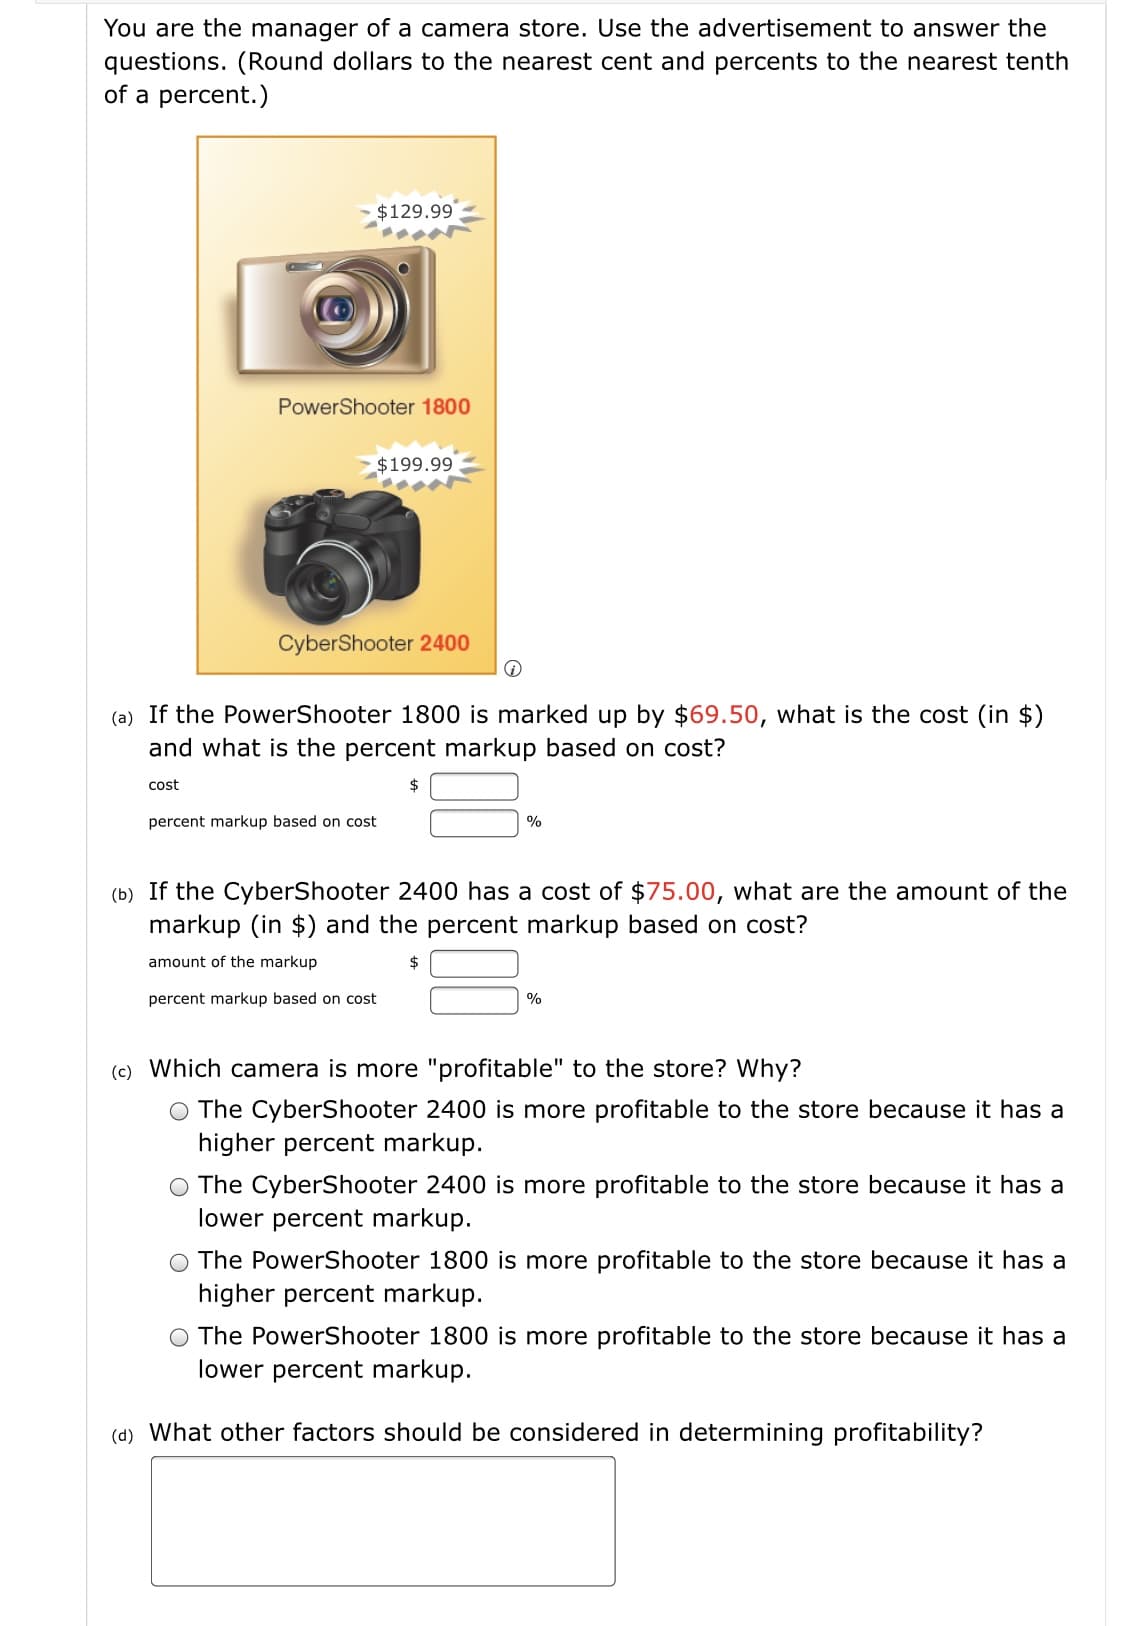 You are the manager of a camera store. Use the advertisement to answer the
questions. (Round dollars to the nearest cent and percents to the nearest tenth
of a percent.)
$129.99
PowerShooter 1800
$199.99
CyberShooter 2400
(a) If the PowerShooter 1800 is marked up by $69.50, what is the cost (in $)
and what is the percent markup based on cost?
cost
2$
percent markup based on cost
%
(b) If the CyberShooter 2400 has a cost of $75.00, what are the amount of the
markup (in $) and the percent markup based on cost?
amount of the markup
2$
percent markup based on cost
%
(c) Which camera is more "profitable" to the store? Why?
O The CyberShooter 2400 is more profitable to the store because it has a
higher percent markup.
O The CyberShooter 2400 is more profitable to the store because it has a
lower percent markup.
O The PowerShooter 1800 is more profitable to the store because it has a
higher percent markup.
The PowerShooter 1800 is more profitable to the store because it has a
lower percent markup.
(d) What other factors should be considered in determining profitability?
